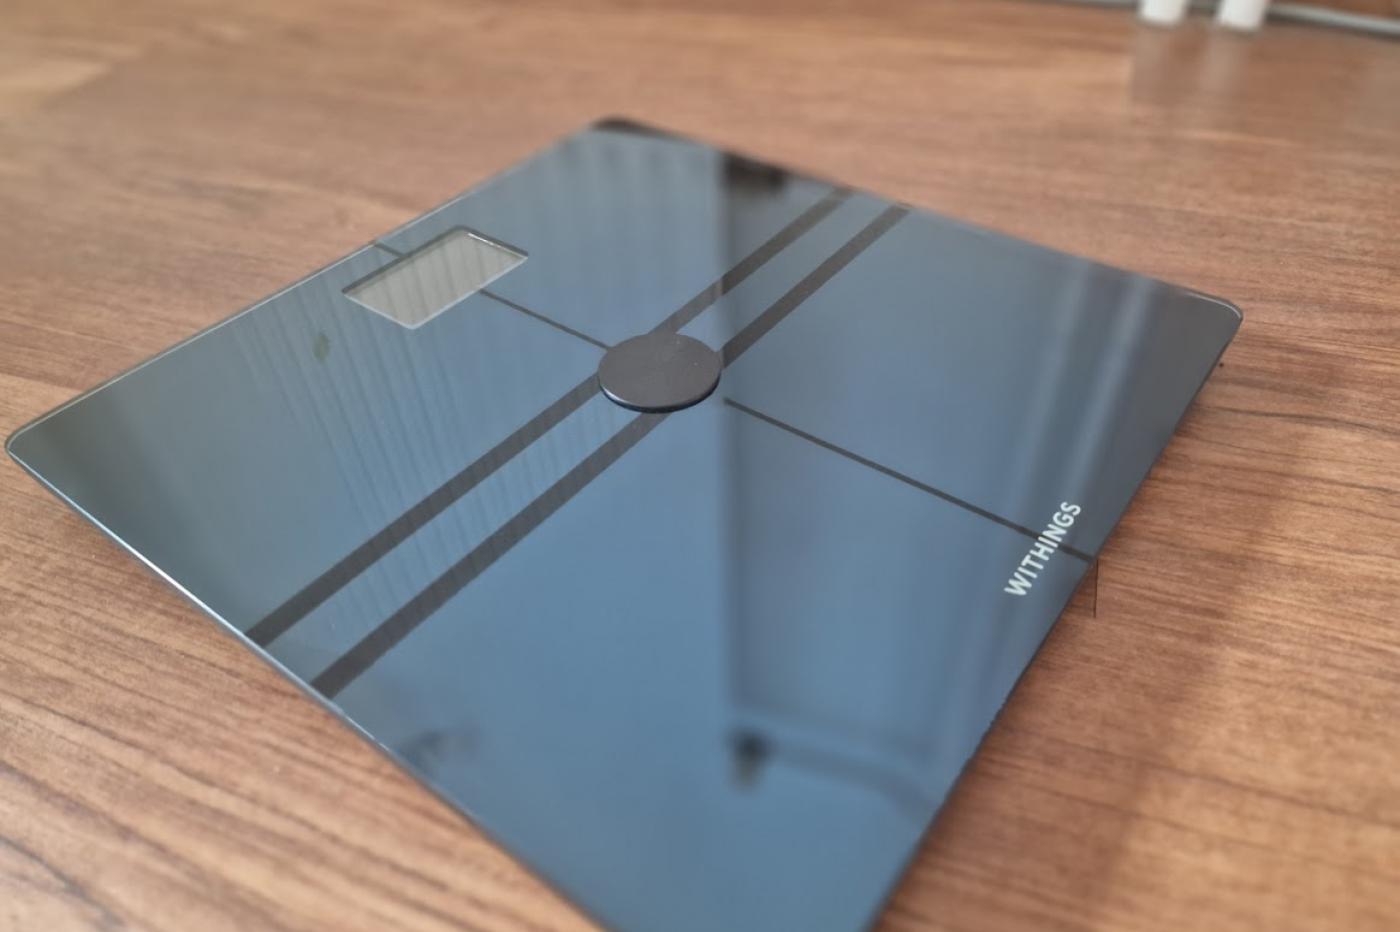 Withings Body Comp smart scales review - Saga Exceptional